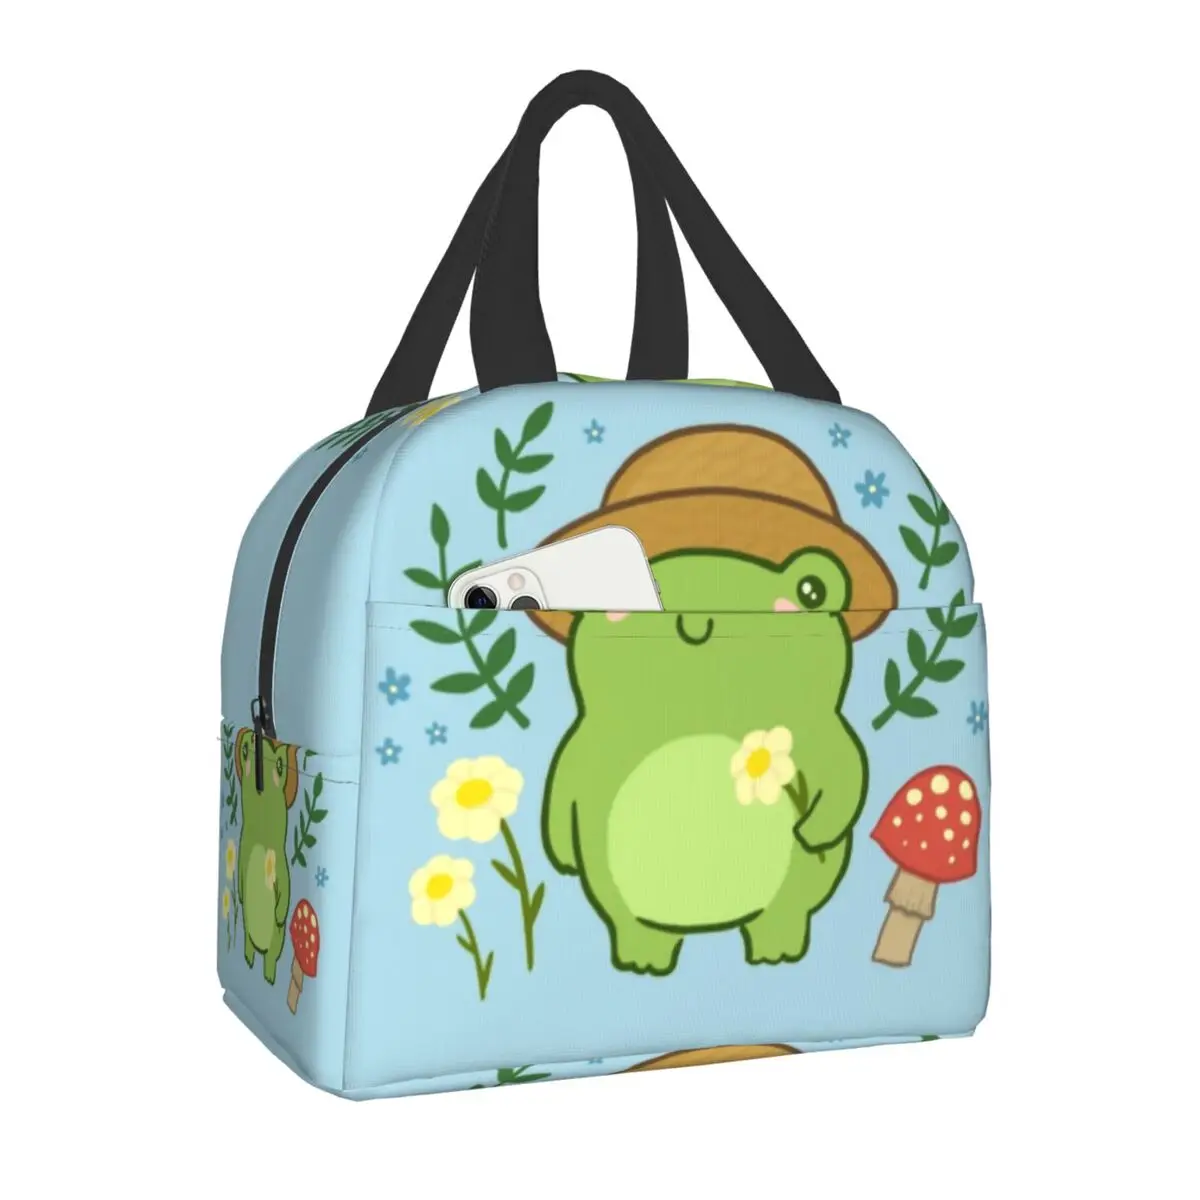 Cute Frog With Hat Mushroom Kawaii Aesthetic Cottagecore Insulated Lunch Bag for Women Leakproof Cooler Thermal Lunch Tote